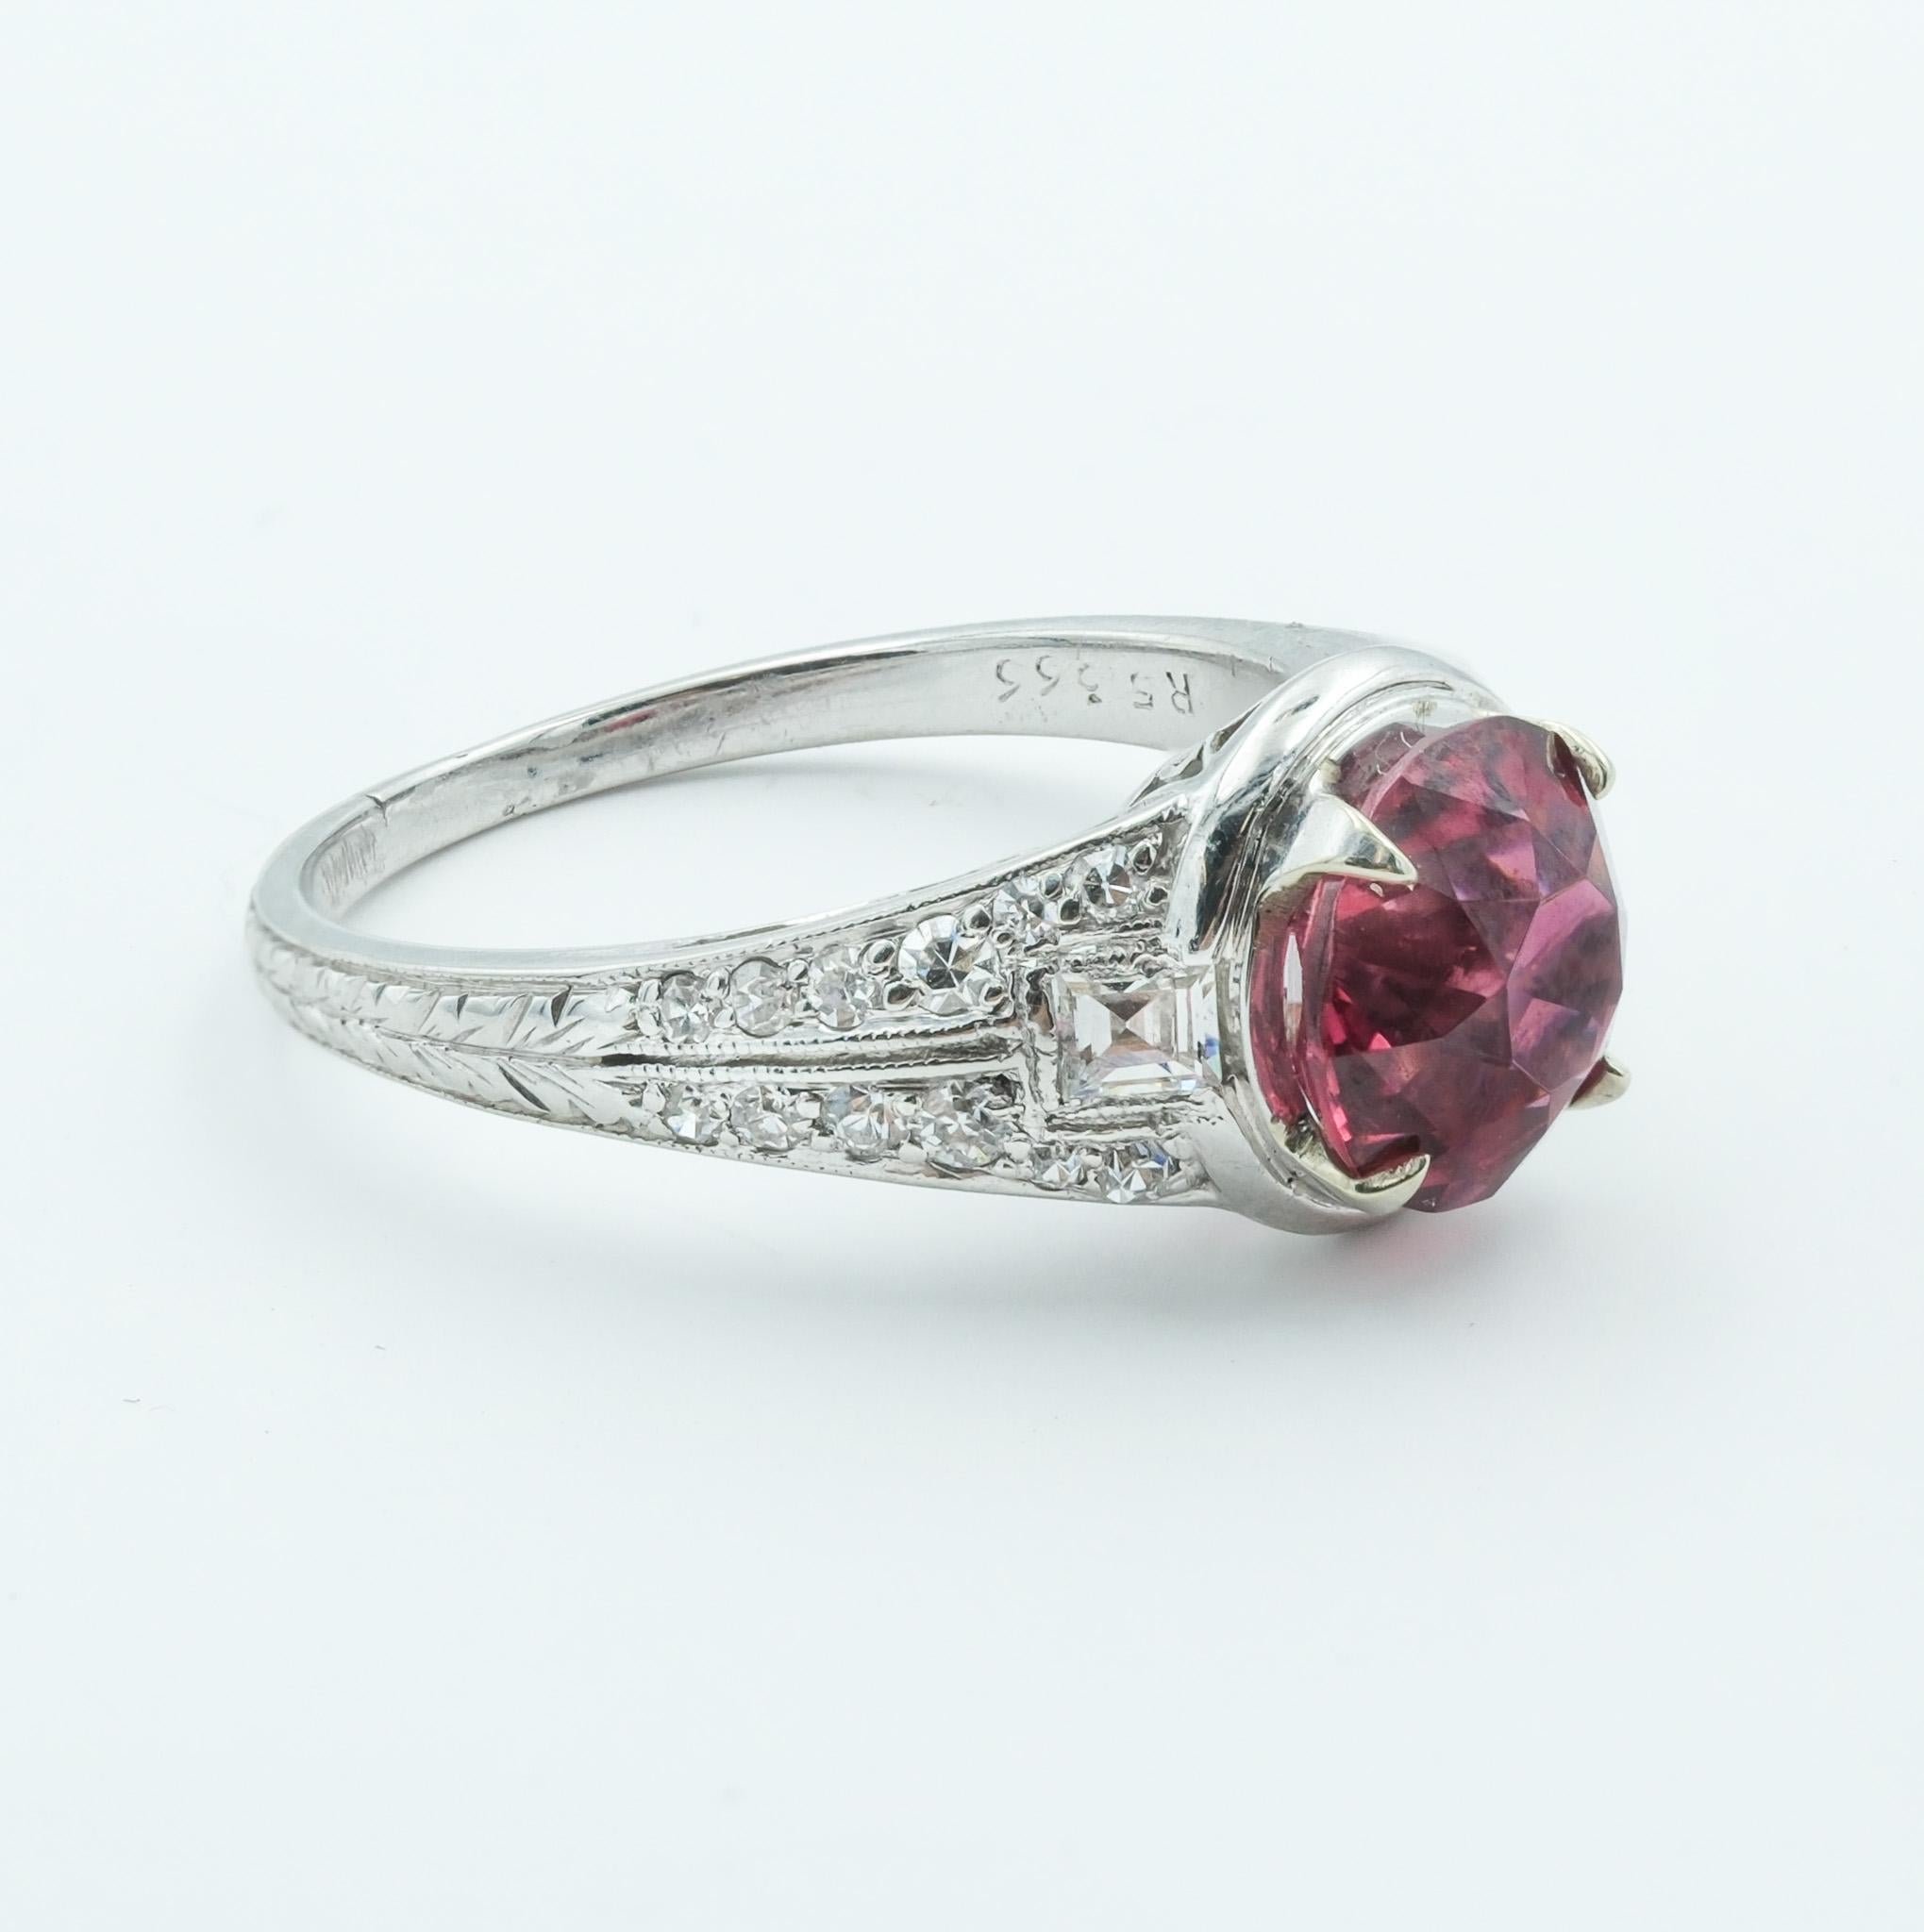 Art Deco Platinum Ring With Natural 2.07ct Spinel and Diamonds c1920's In Good Condition For Sale In Fairfield, CT